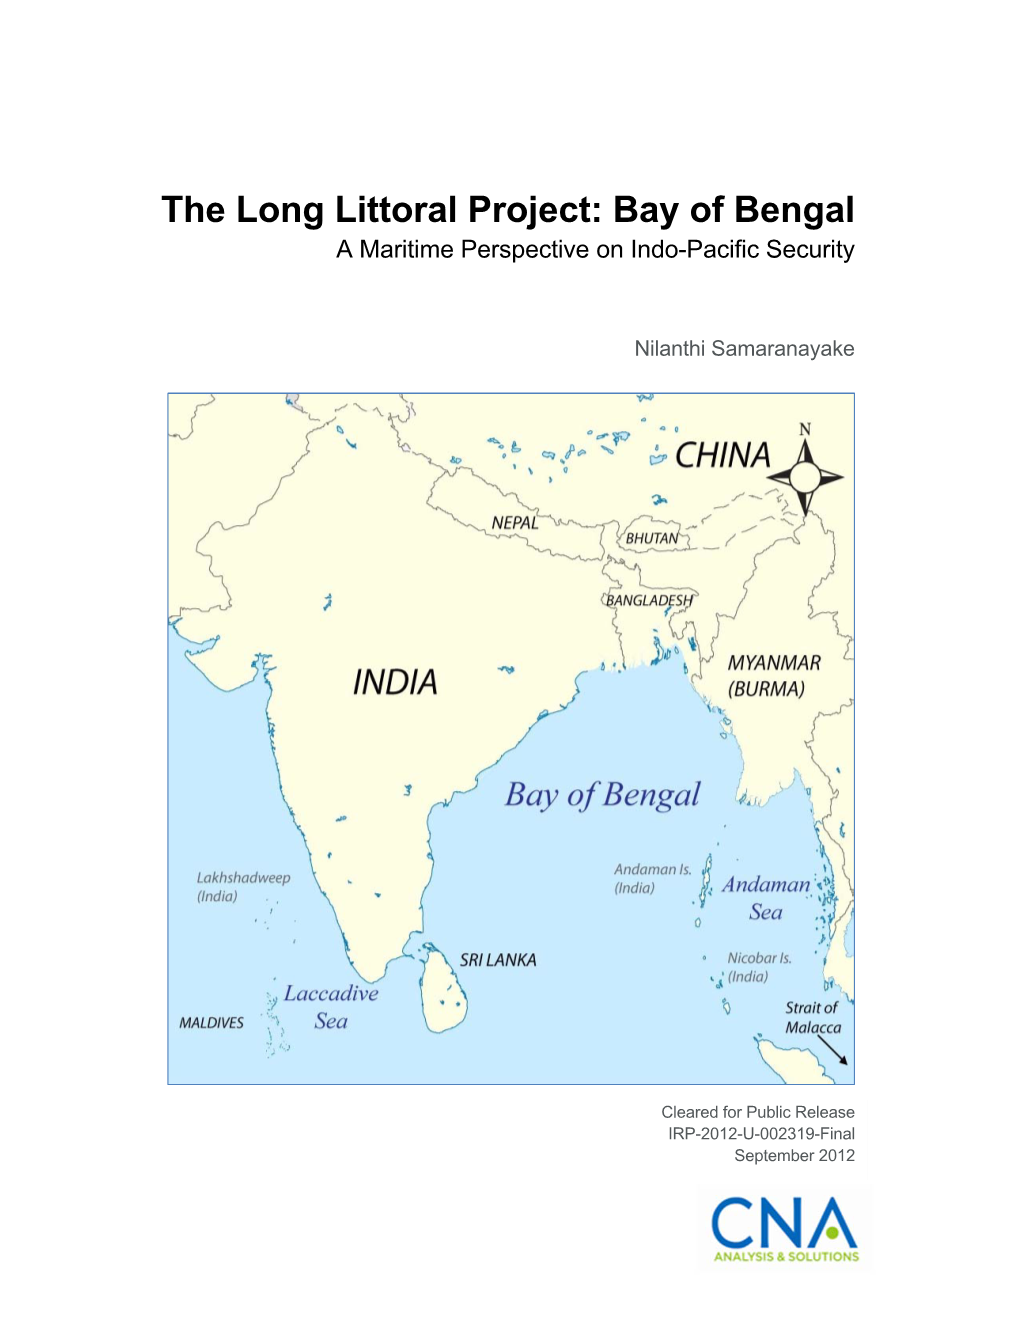 Bay of Bengal a Maritime Perspective on Indo-Pacific Security